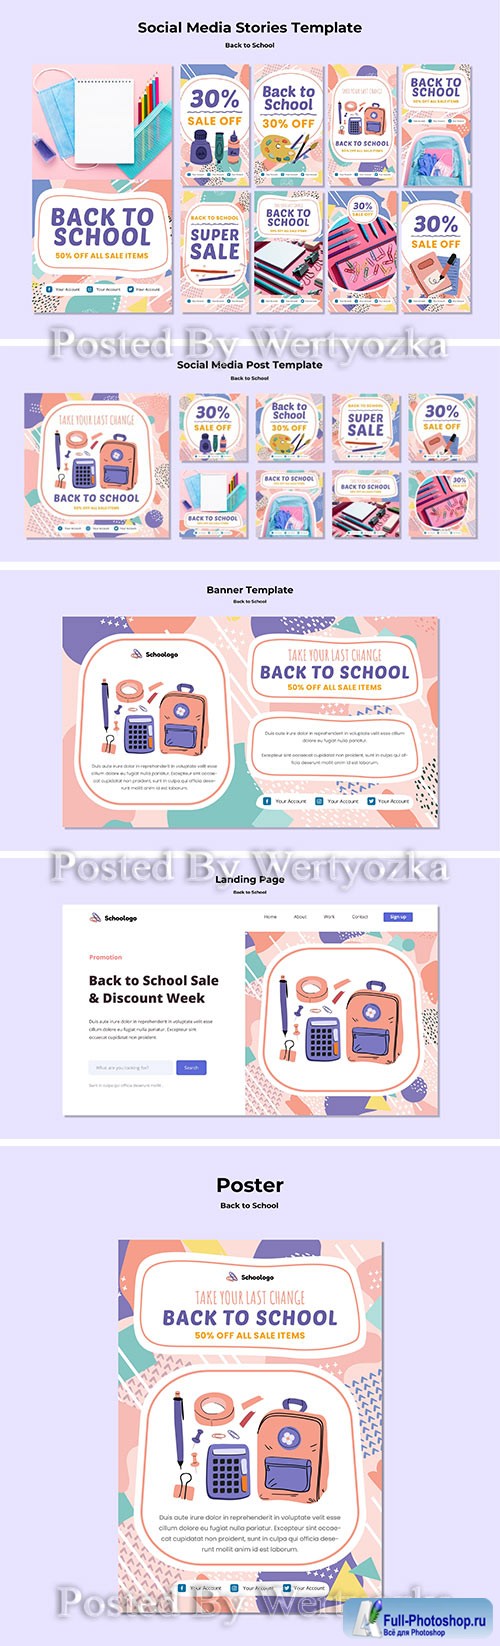 Back to school poster, back to school social media post